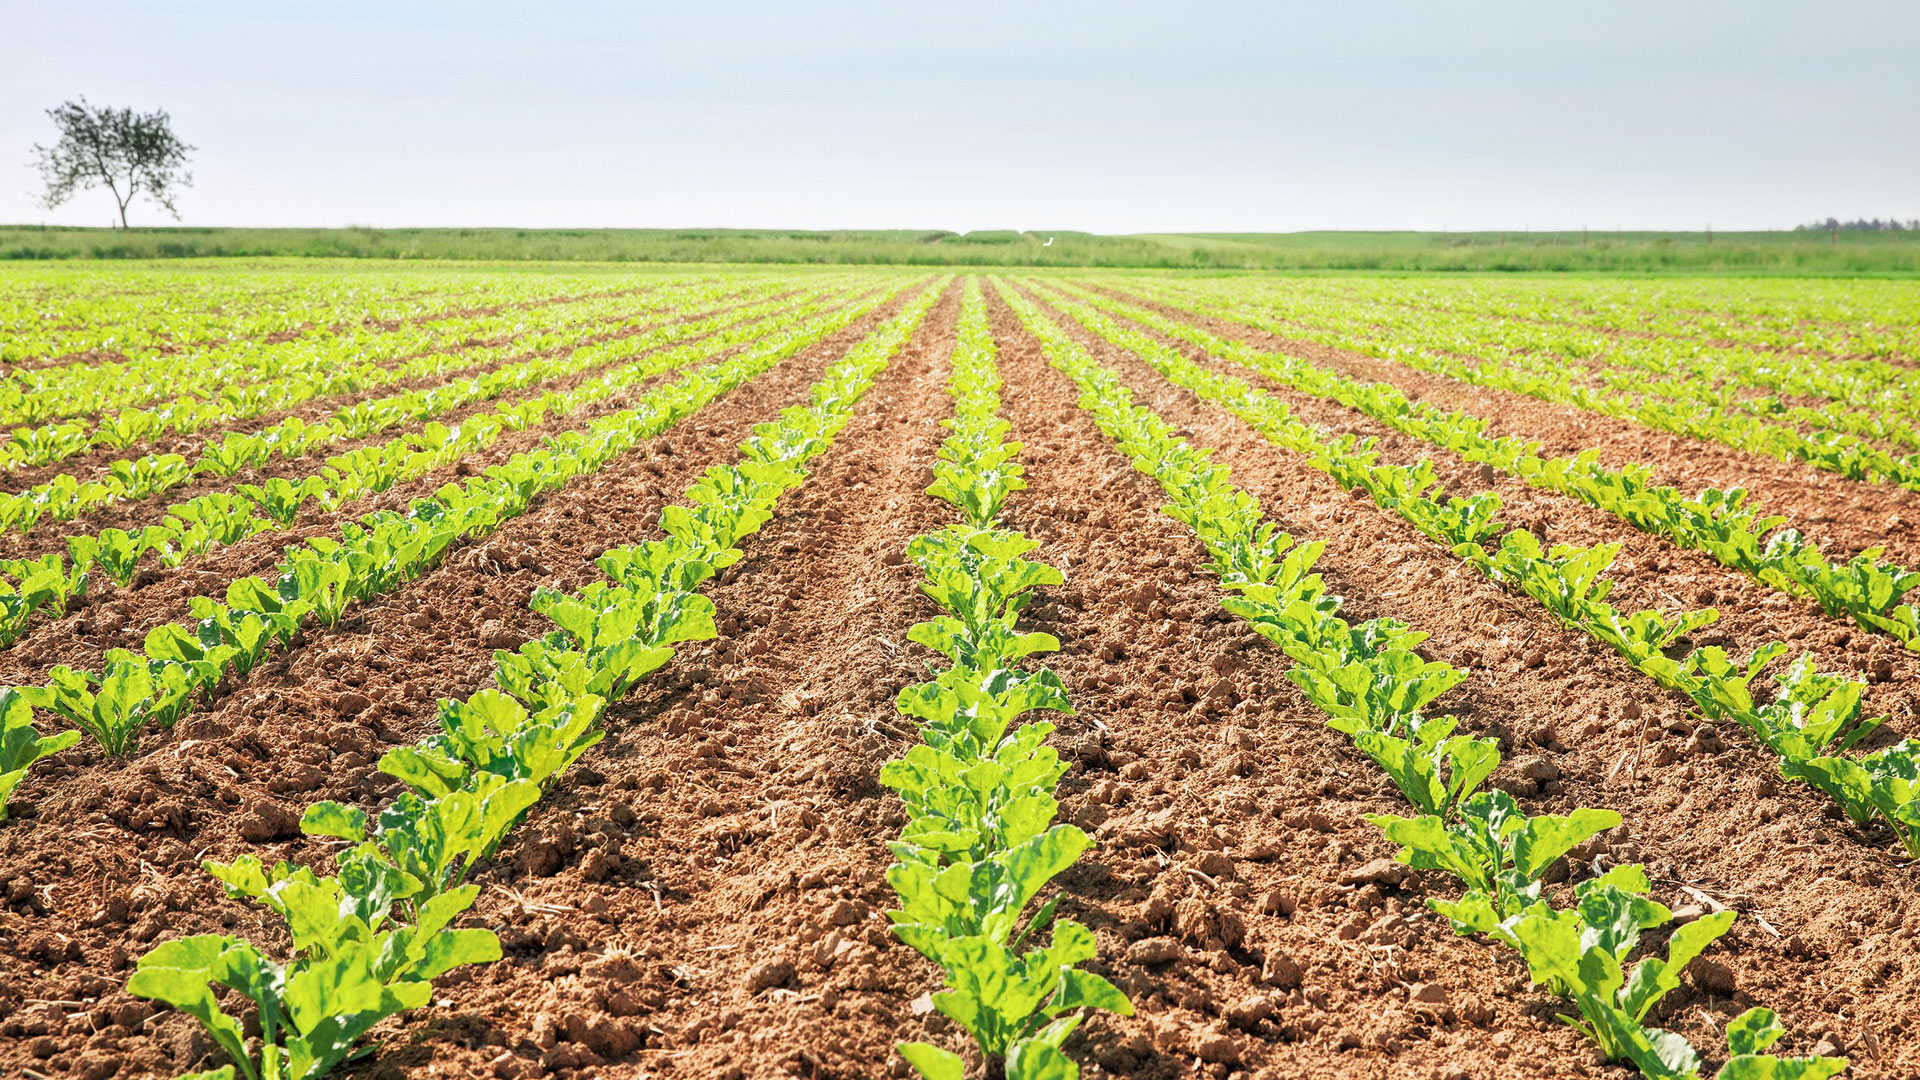 CONVISO® SMART cultivation system for sugarbeet approved for use in Germany